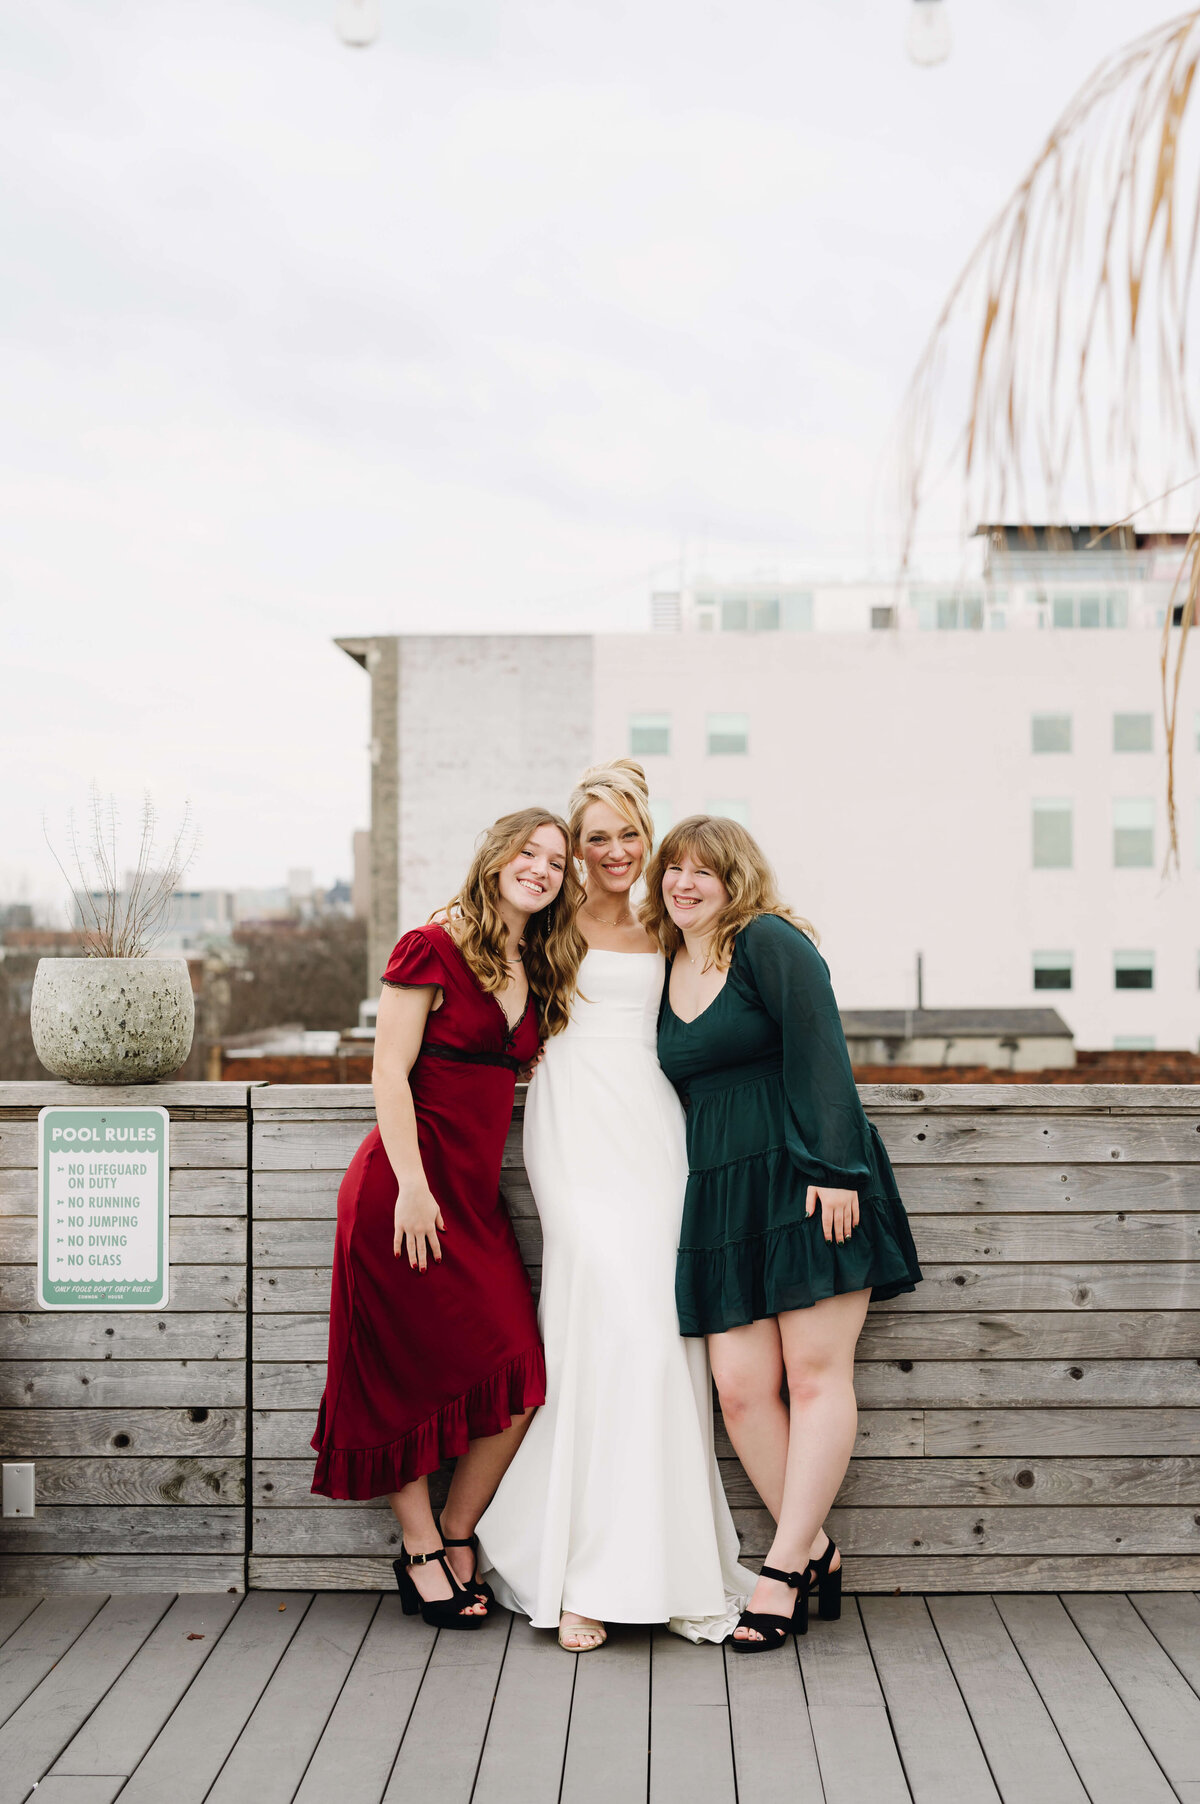 bride and bridesmaids who are in gem tone dresses stand together for wedding portrait